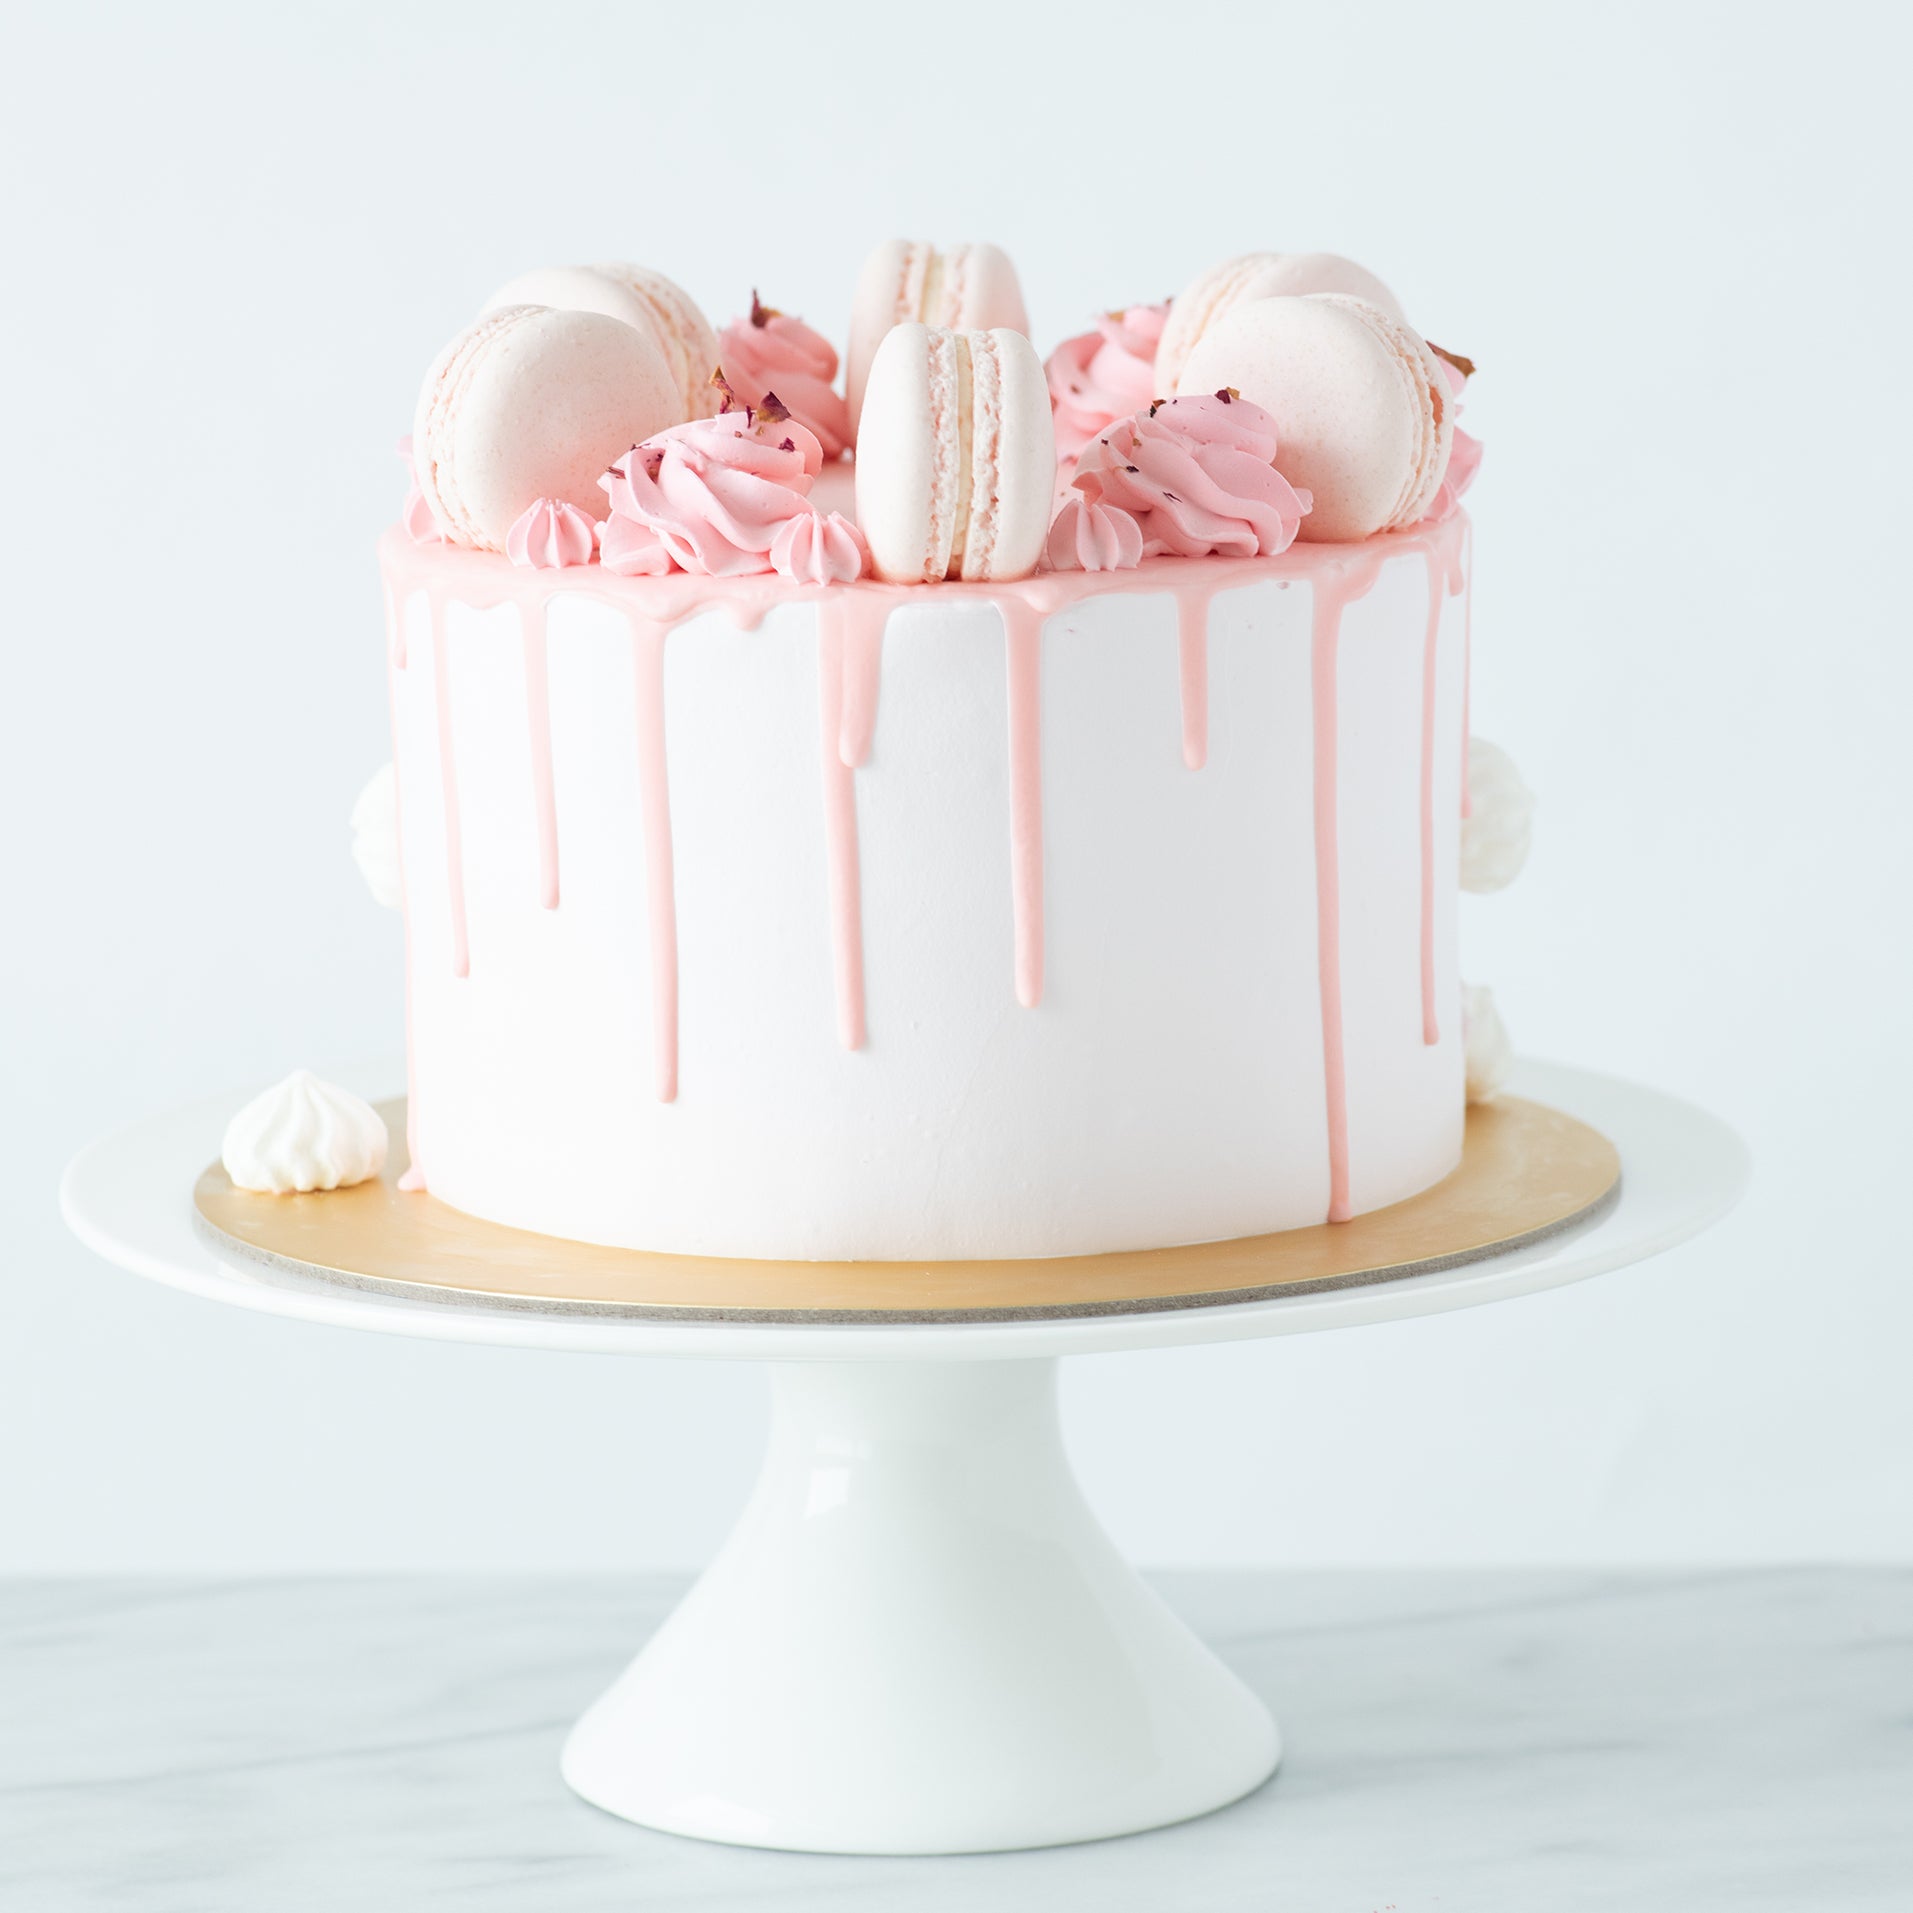 Sakura Lychee Mille Crepe Cake | Giftr - Malaysia's Leading Online Gift Shop